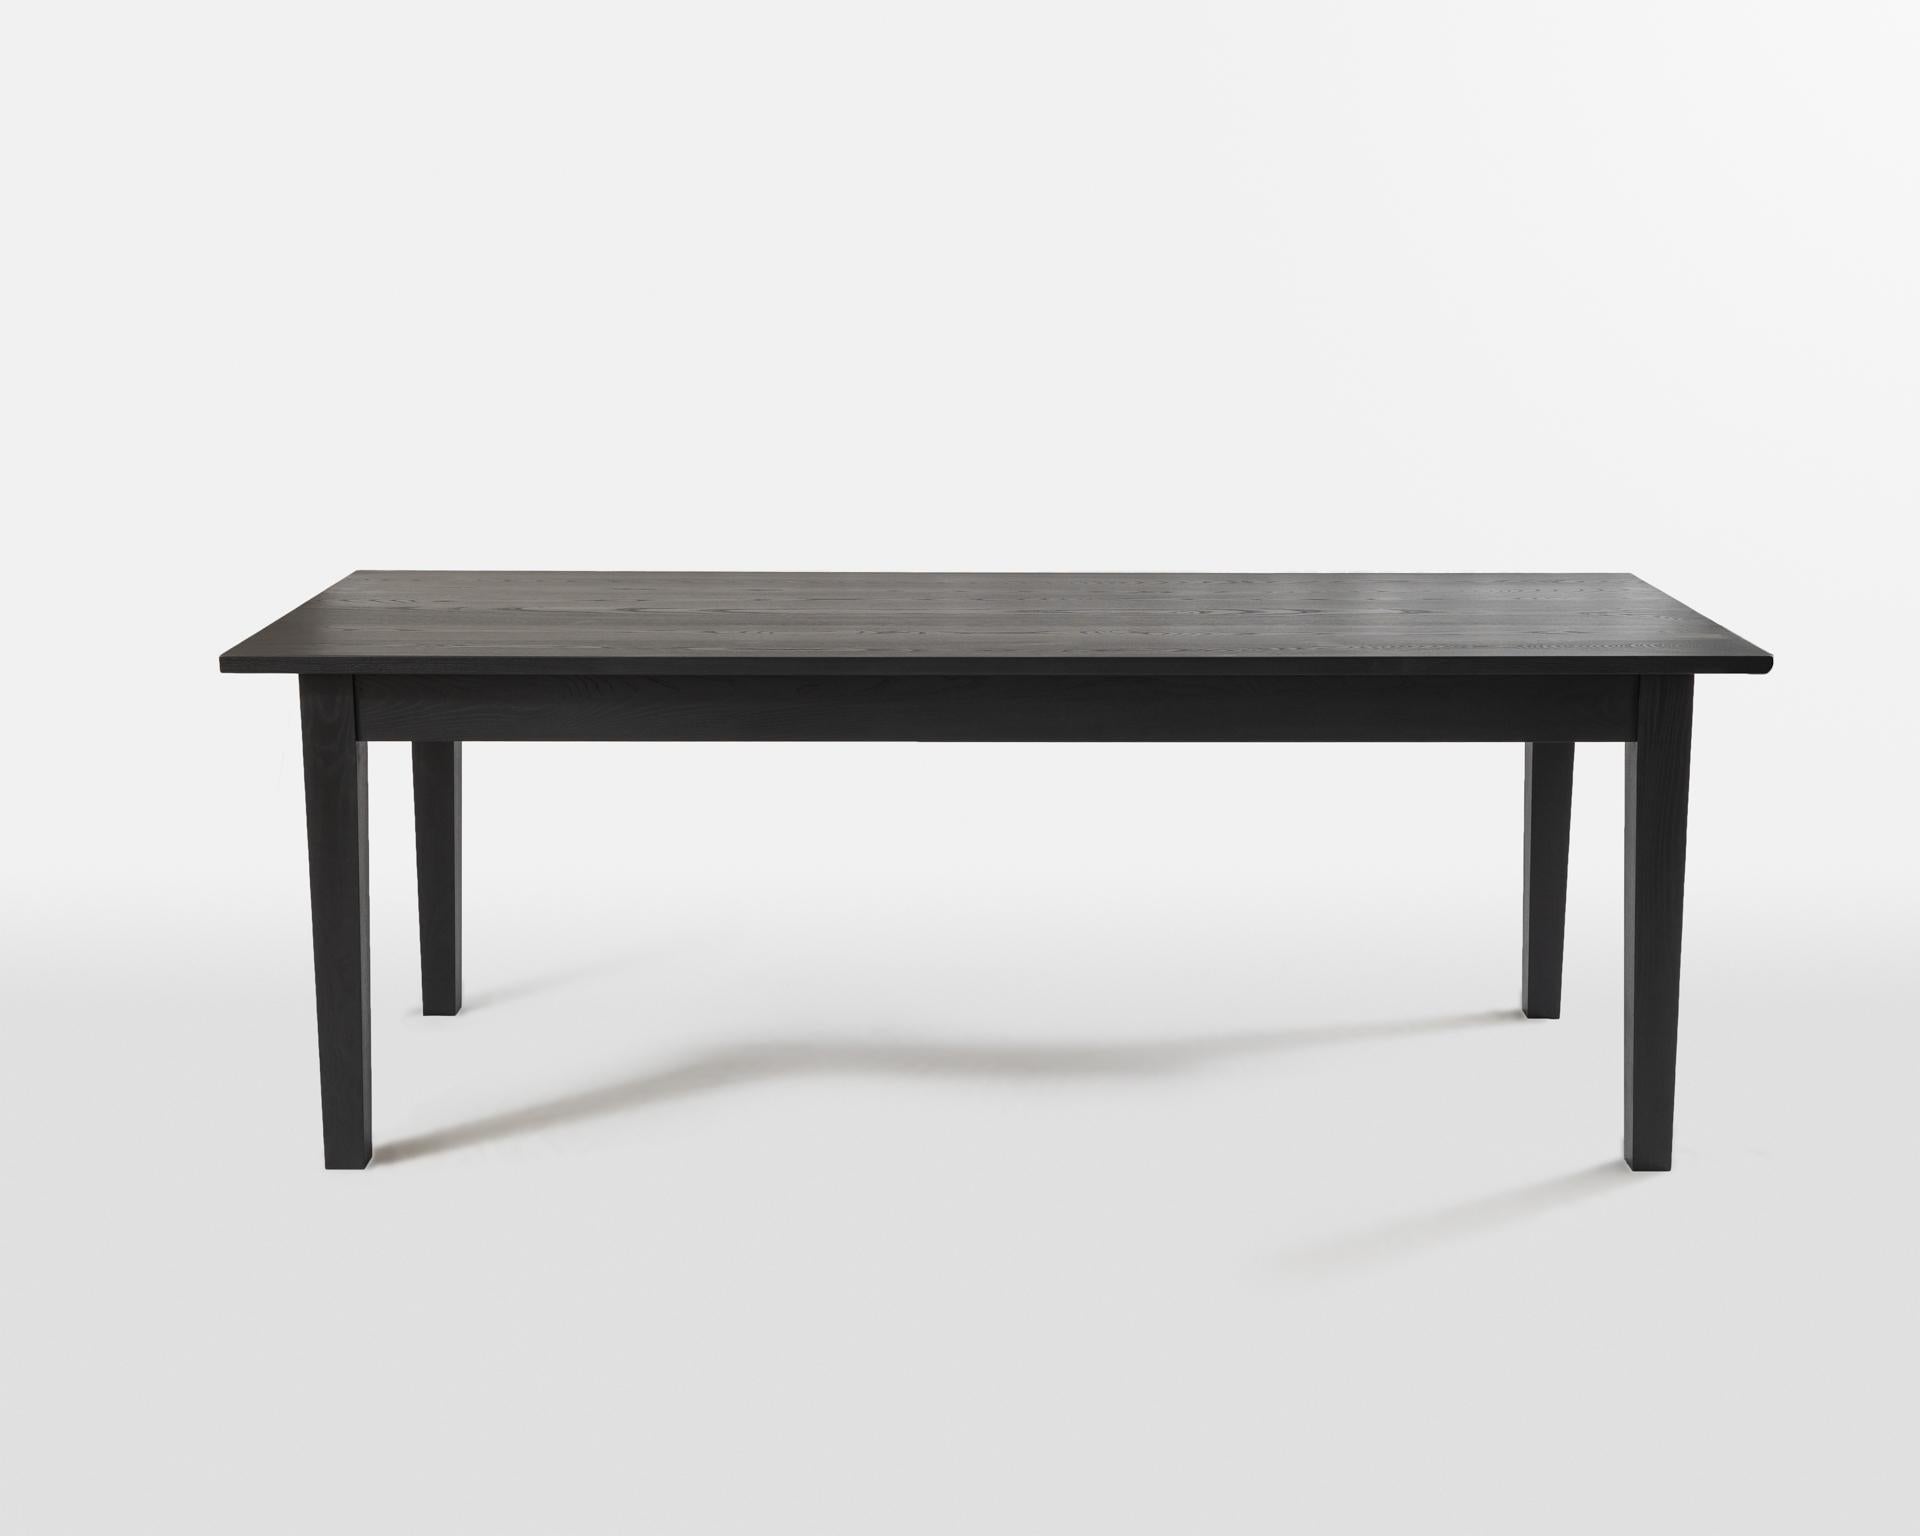 American New England Farm Table, Shaker Modern Dining Table in Blackened Ash For Sale